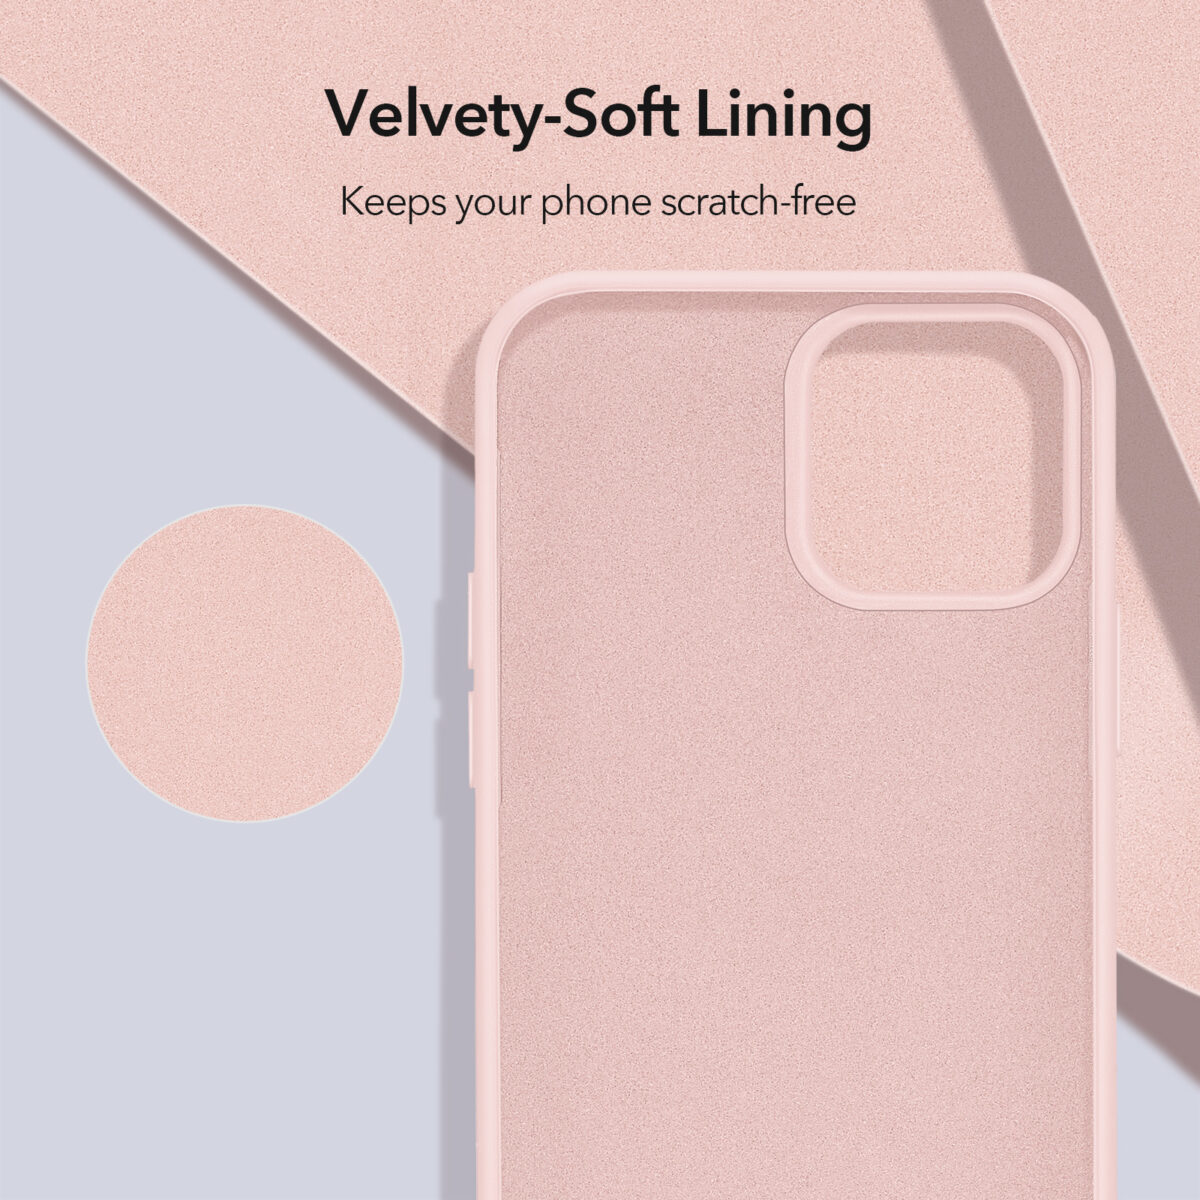 ESR Soft Silicone velvety soft lining Case Sand Pink for iPhone 12 Pro